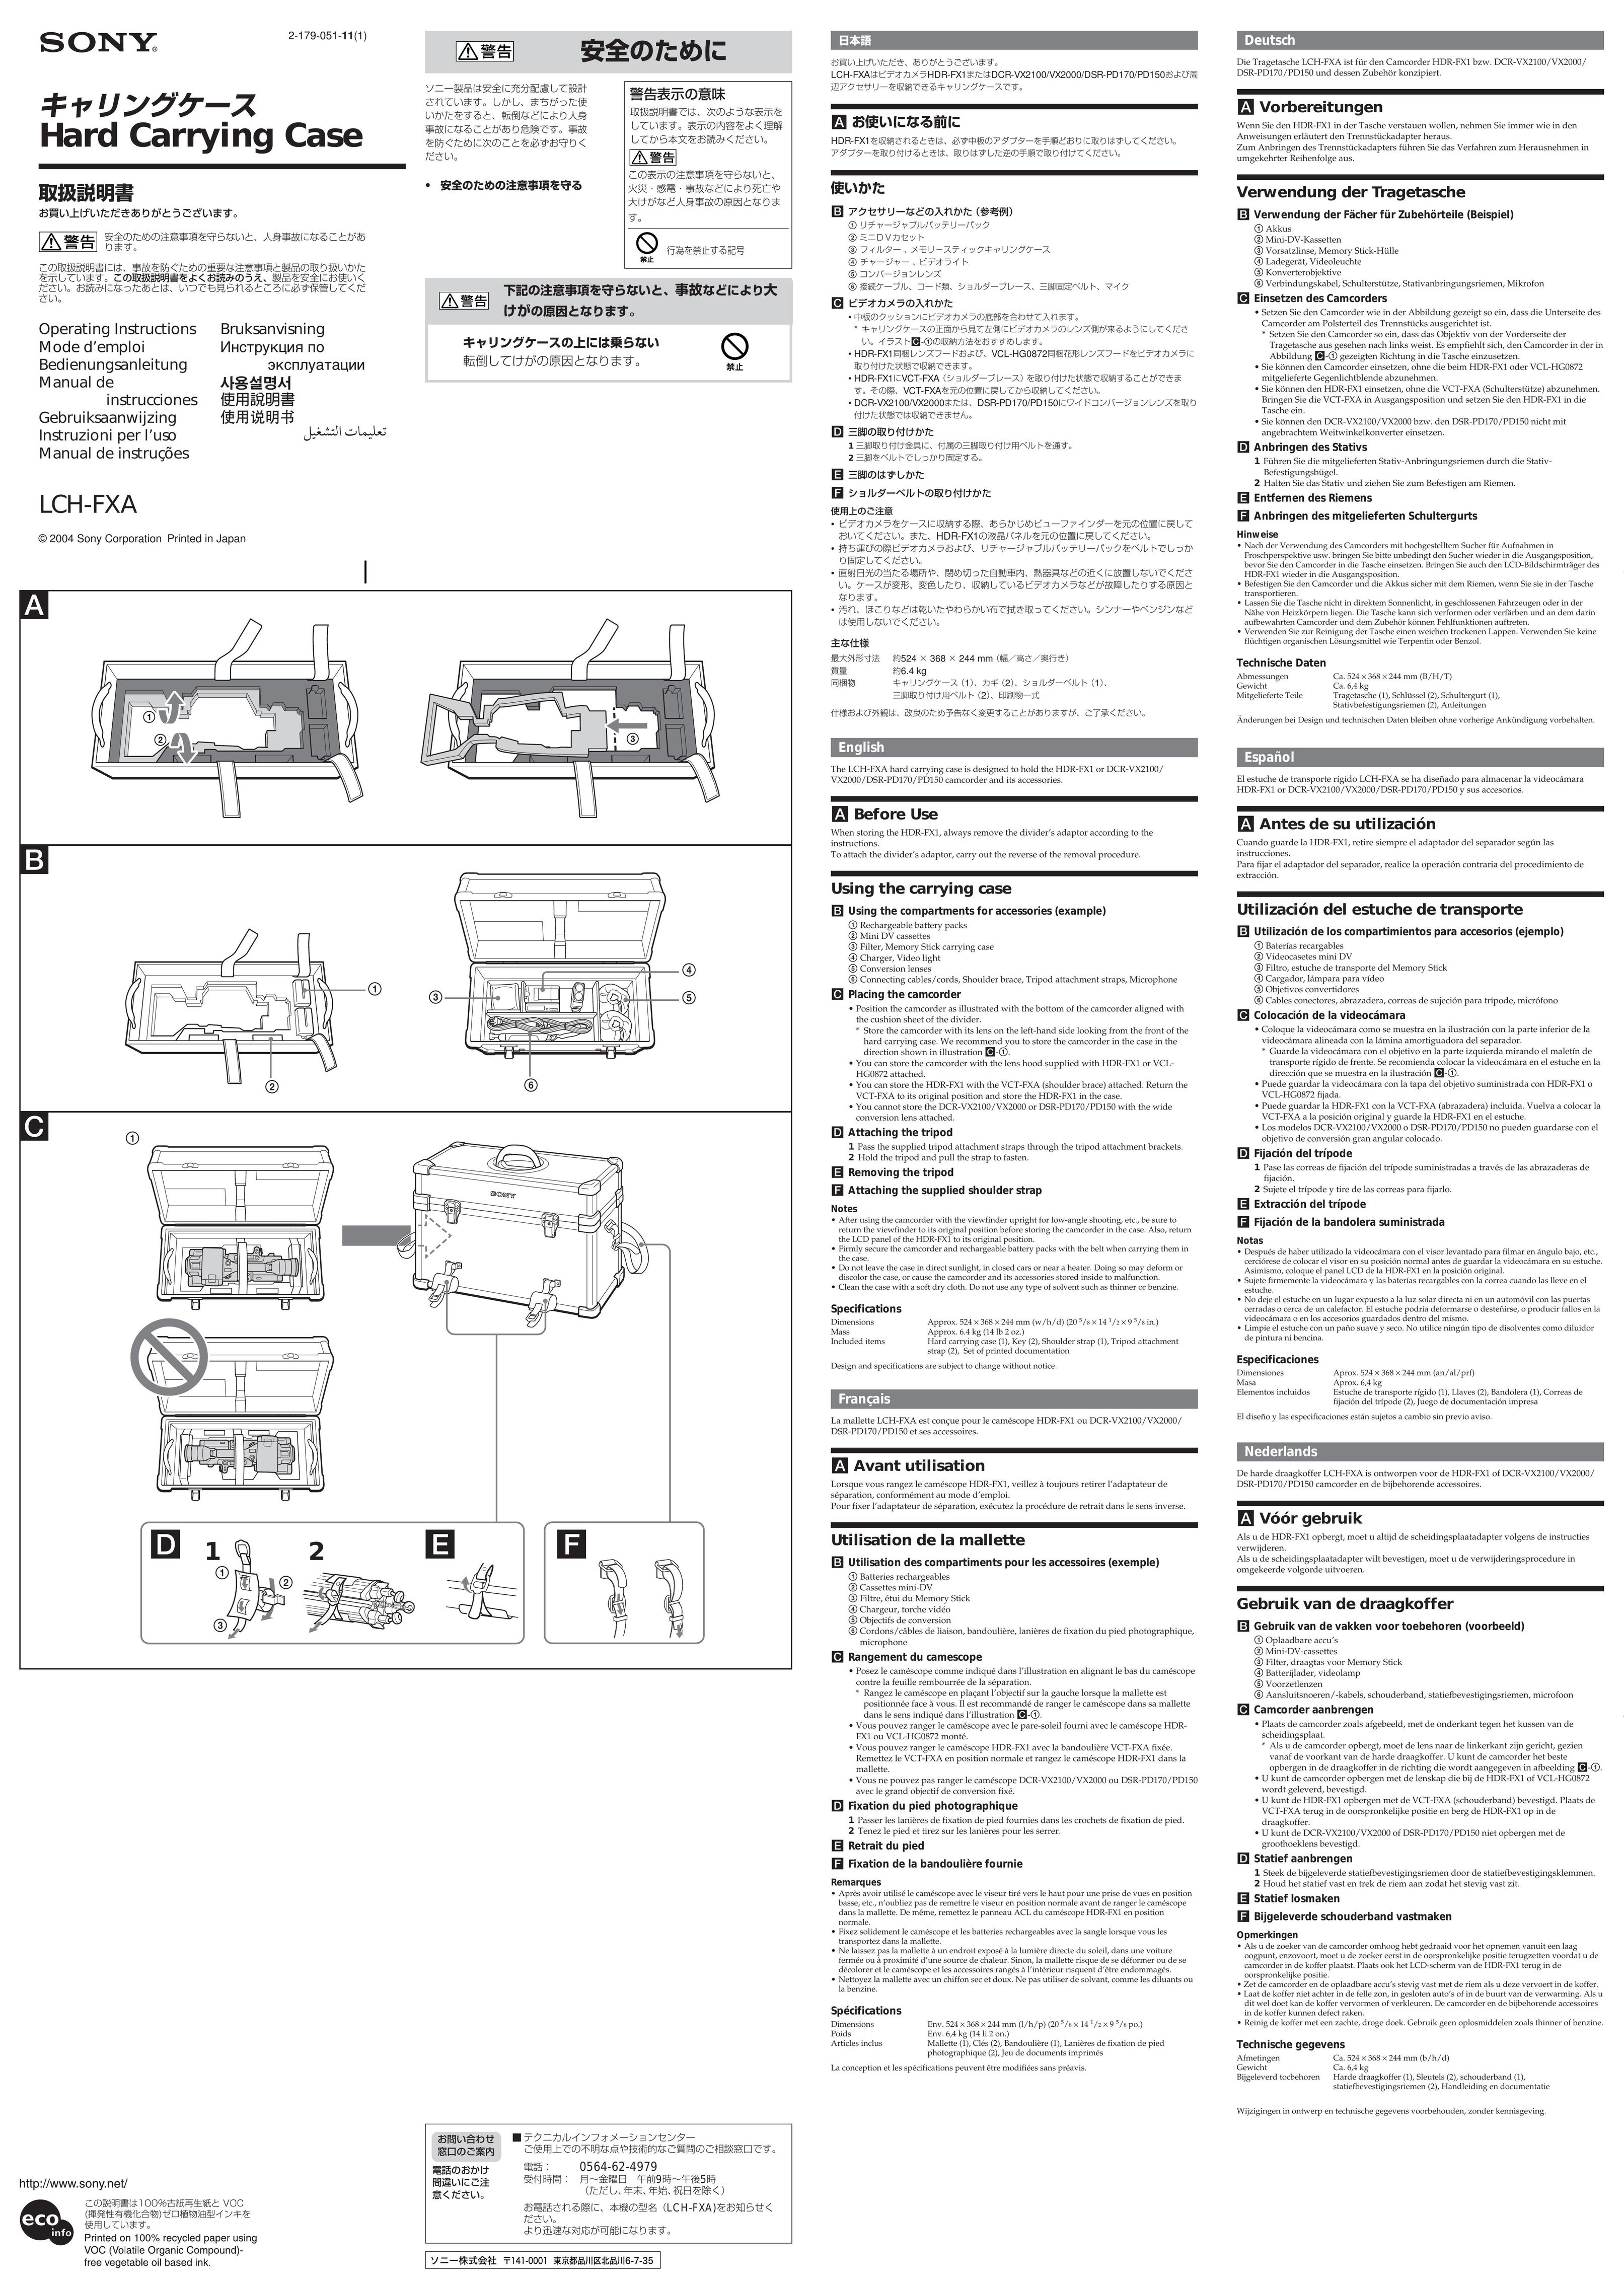 Sony LCH-FXA Carrying Case User Manual